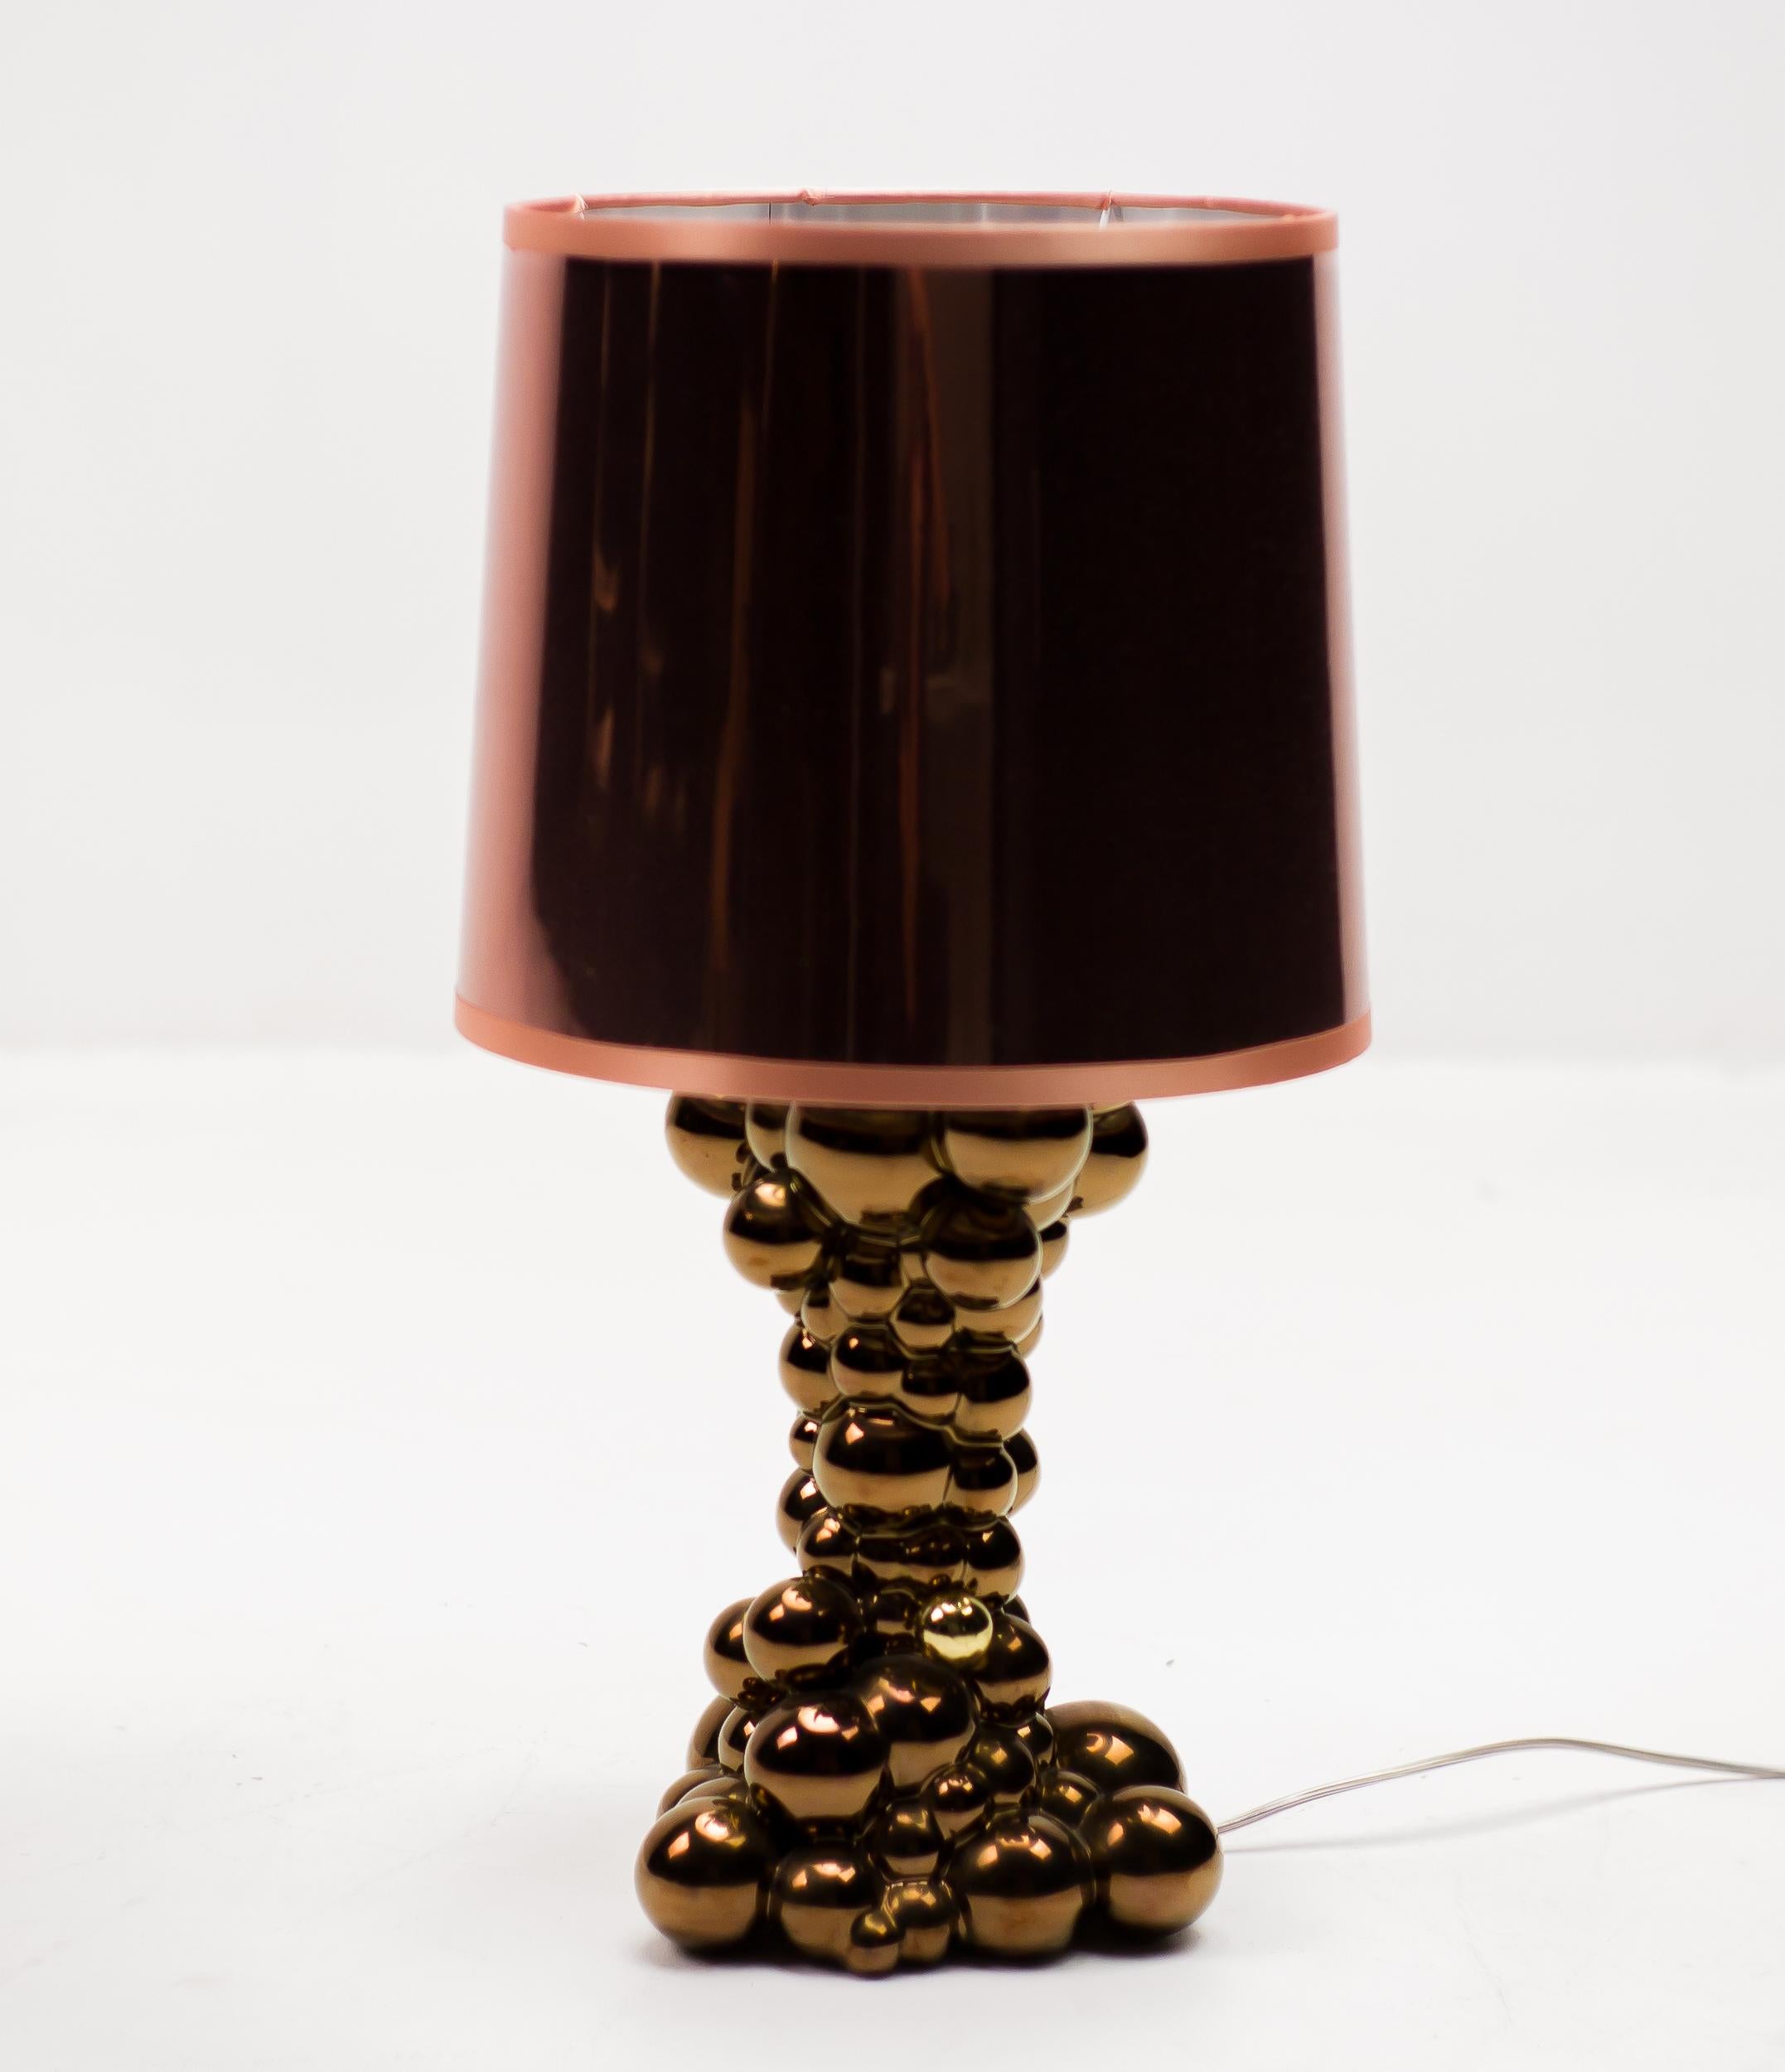 Rare Bubbles table lamp in glossy copper ceramic designed by Jaime Hayon for Bosa. 
The bubbles lamp evokes the effervescent effect of a flurry of bubbles. The material that is transformed by a touch and a body that fills with light. To achieve the